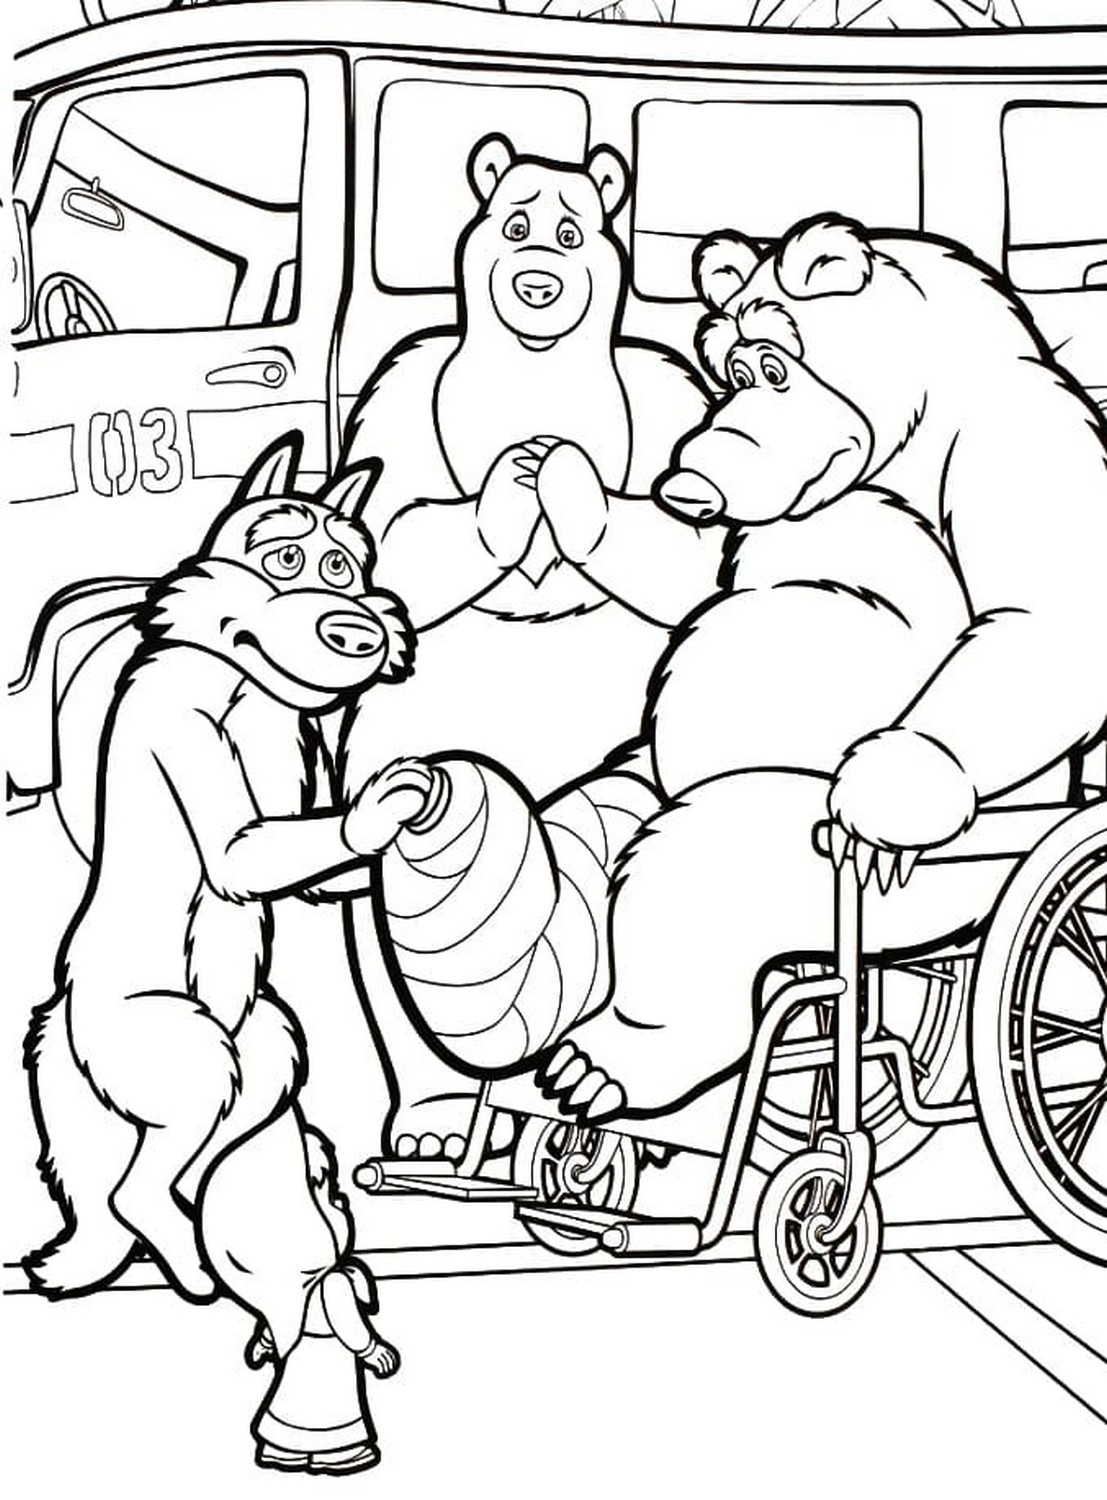 Mascha und der Br 74  coloring page to print and coloring